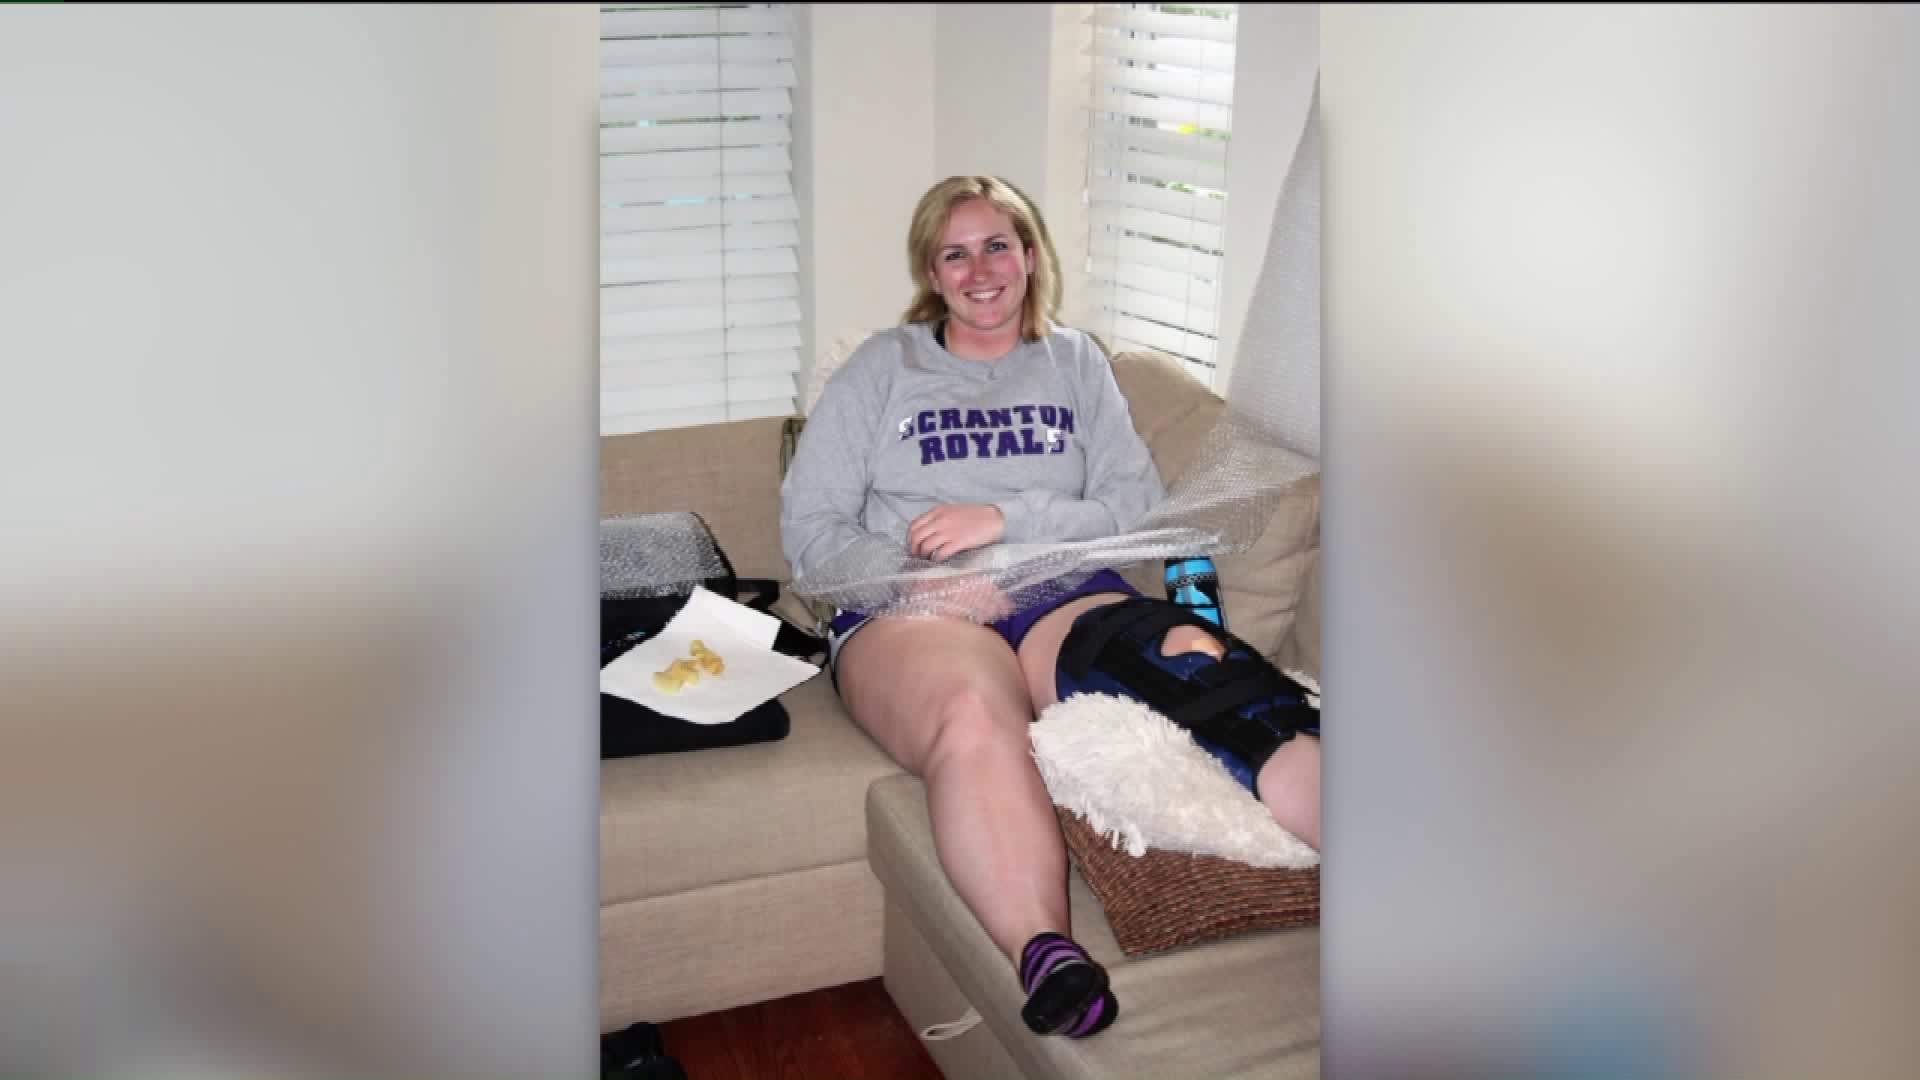 PRP Procedure Helps Athlete Stay on Court